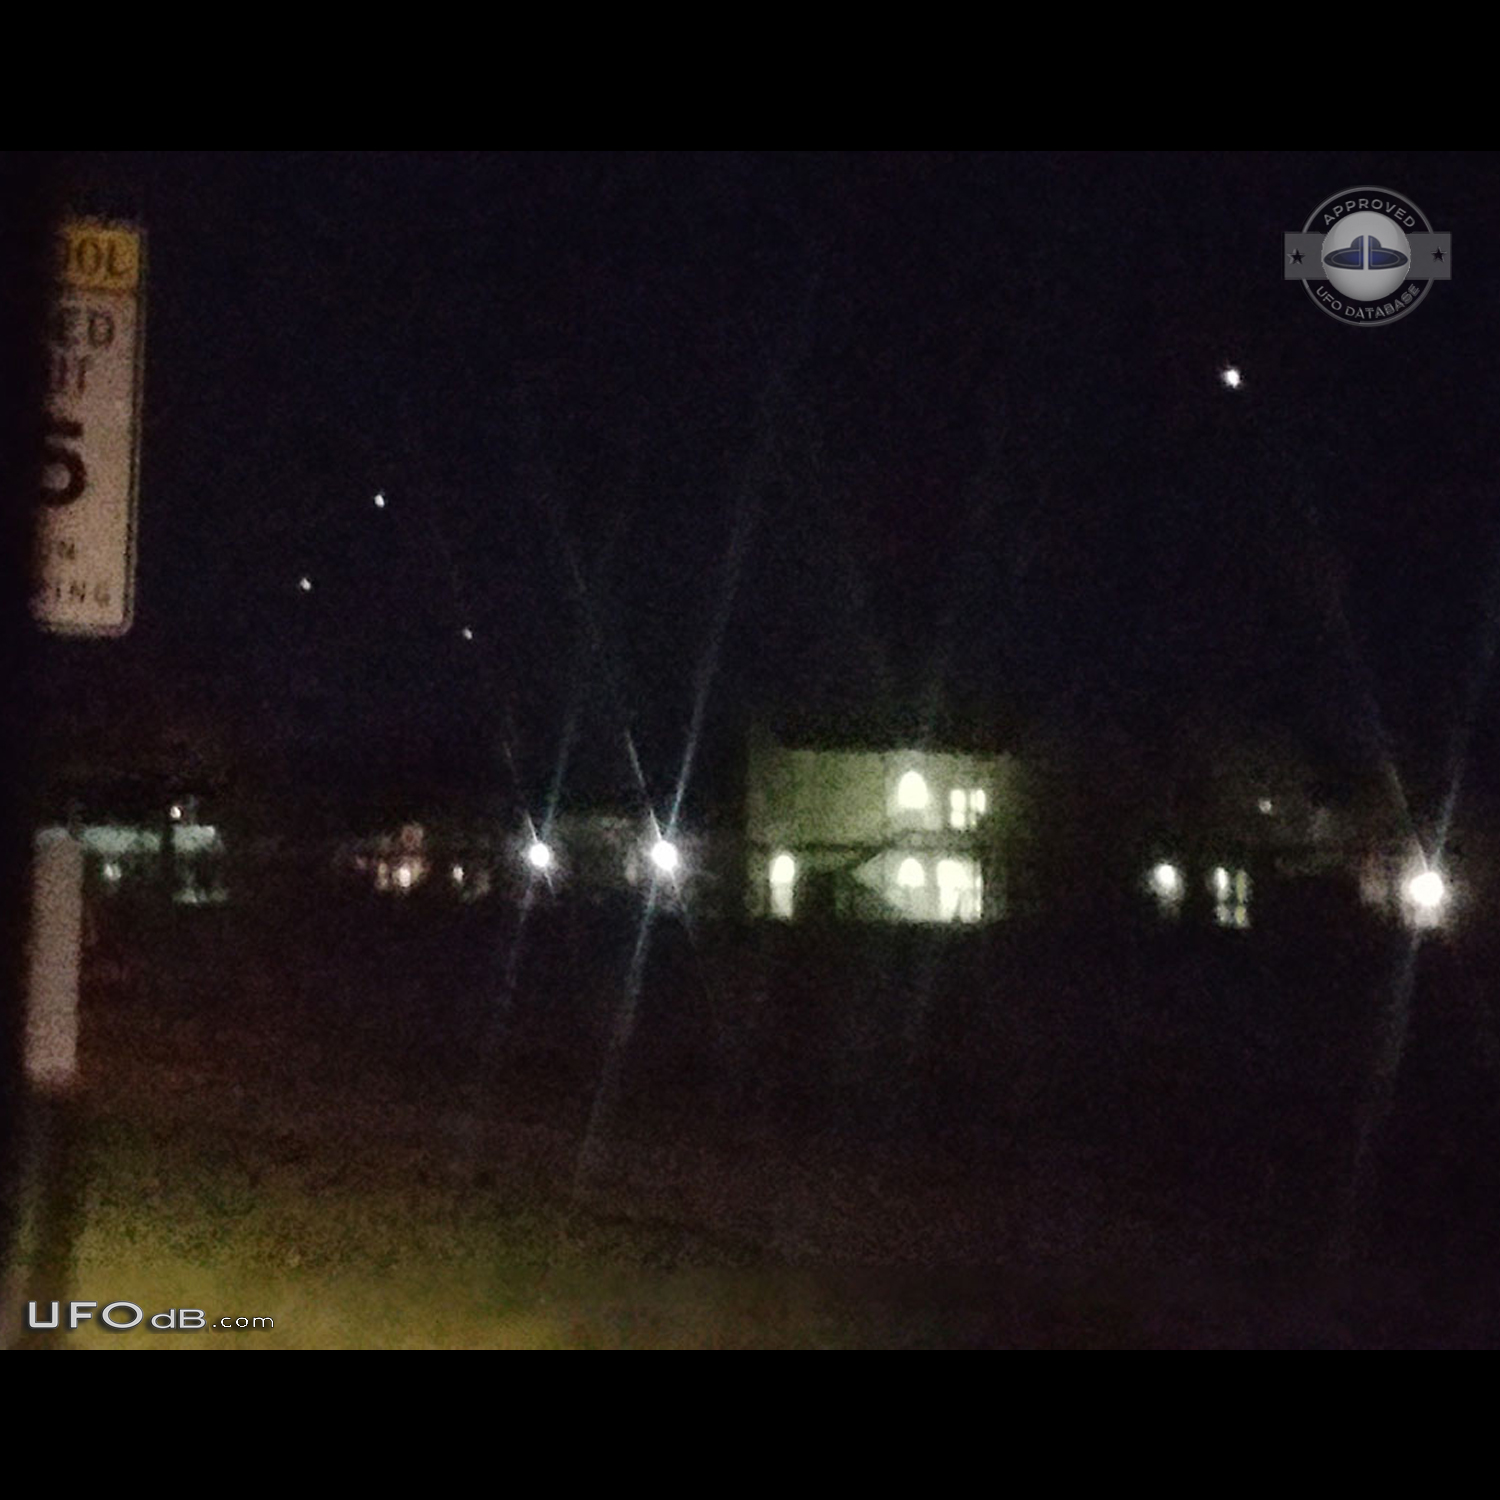 Me and coworker driving and saw the UFOs - Saint Cloud Florida USA 201 UFO Picture #780-1